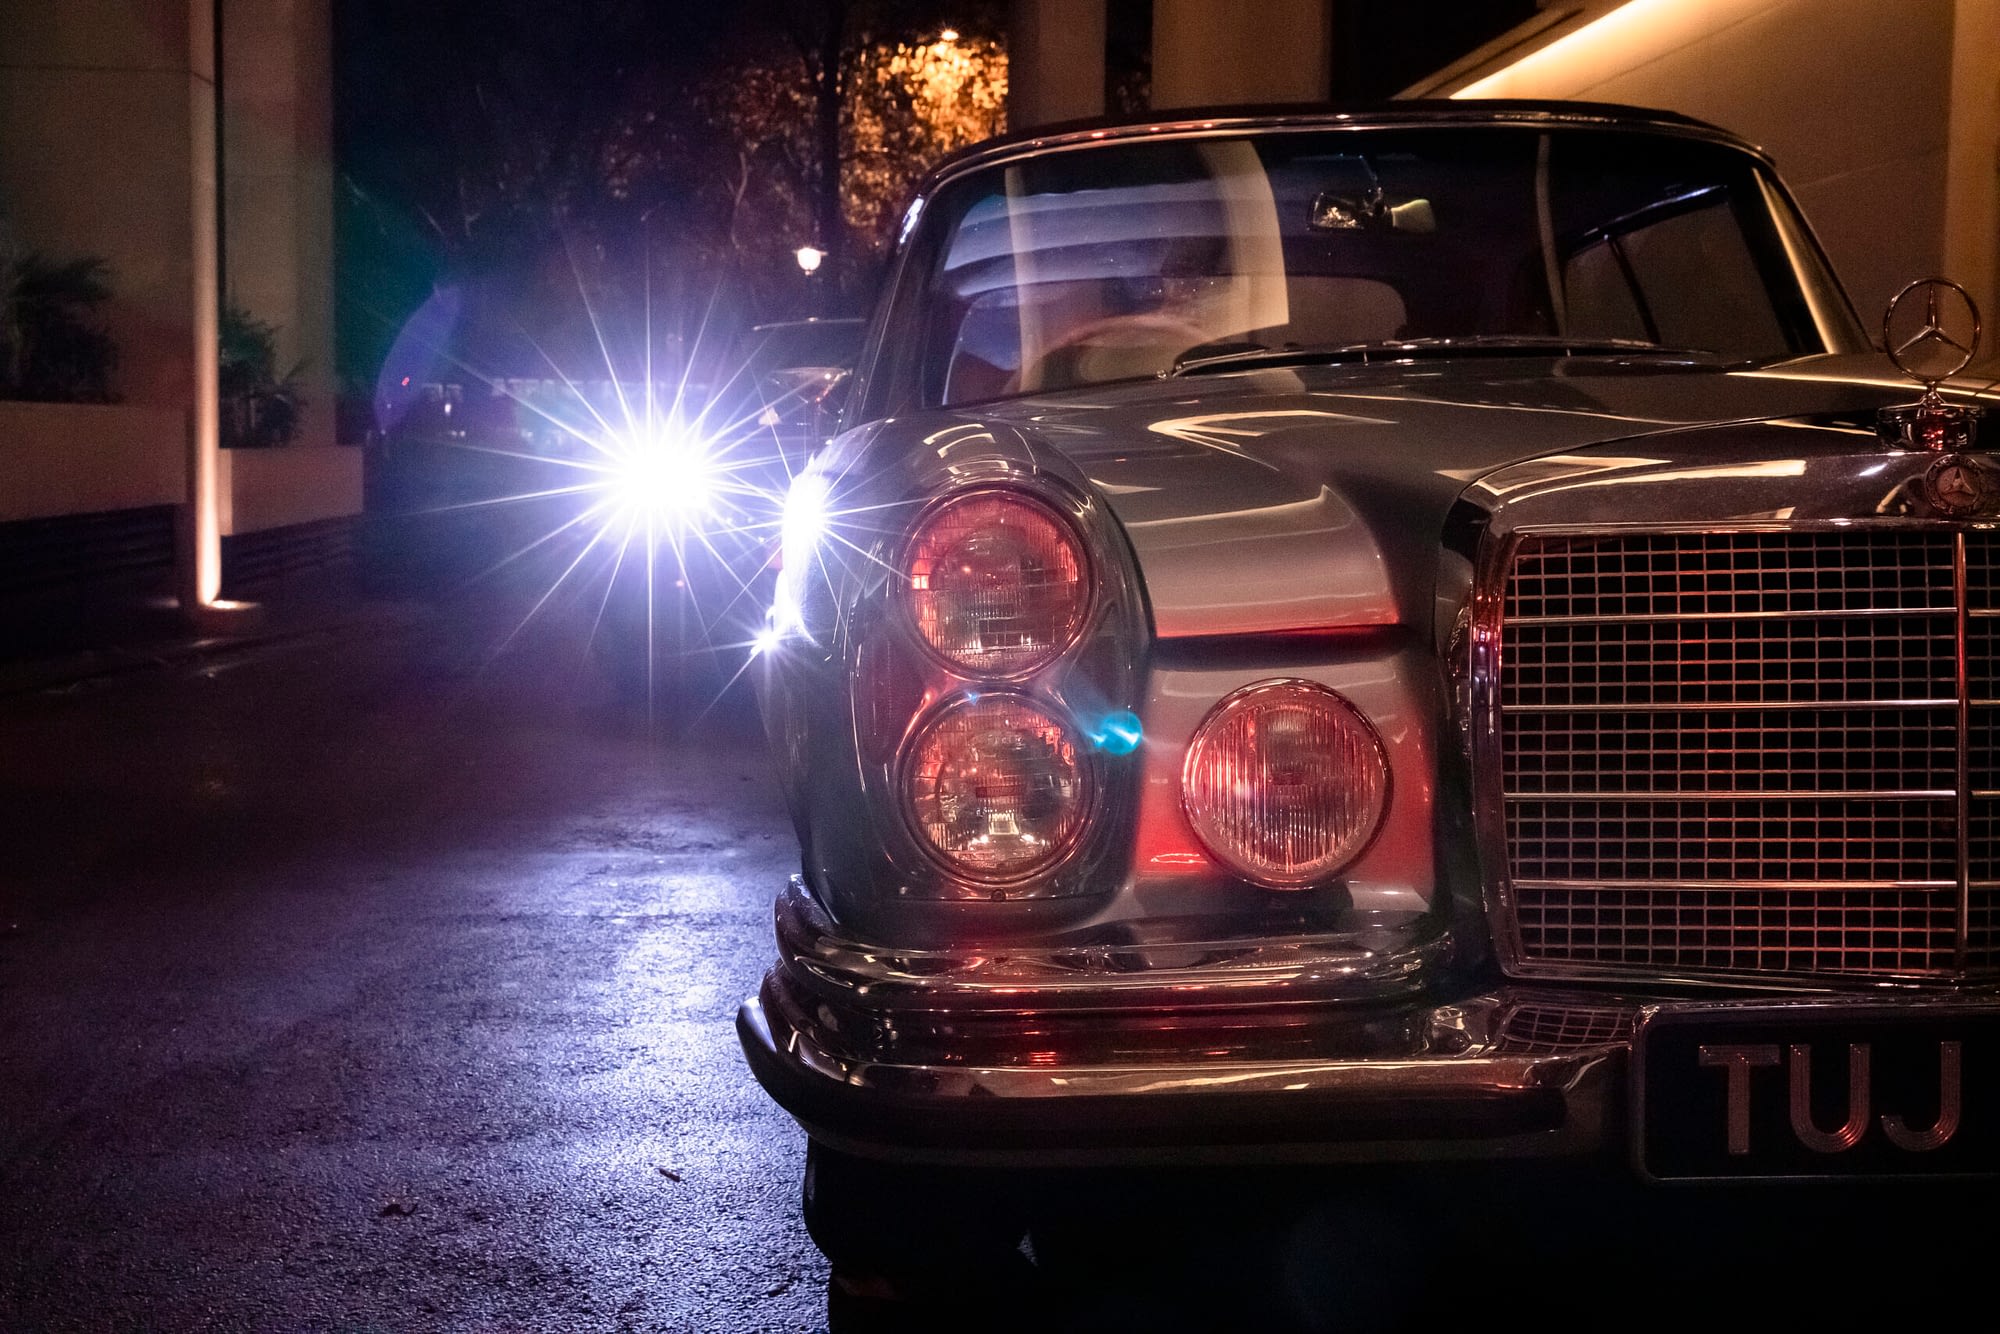 old Mercedes car at night with lights reflections